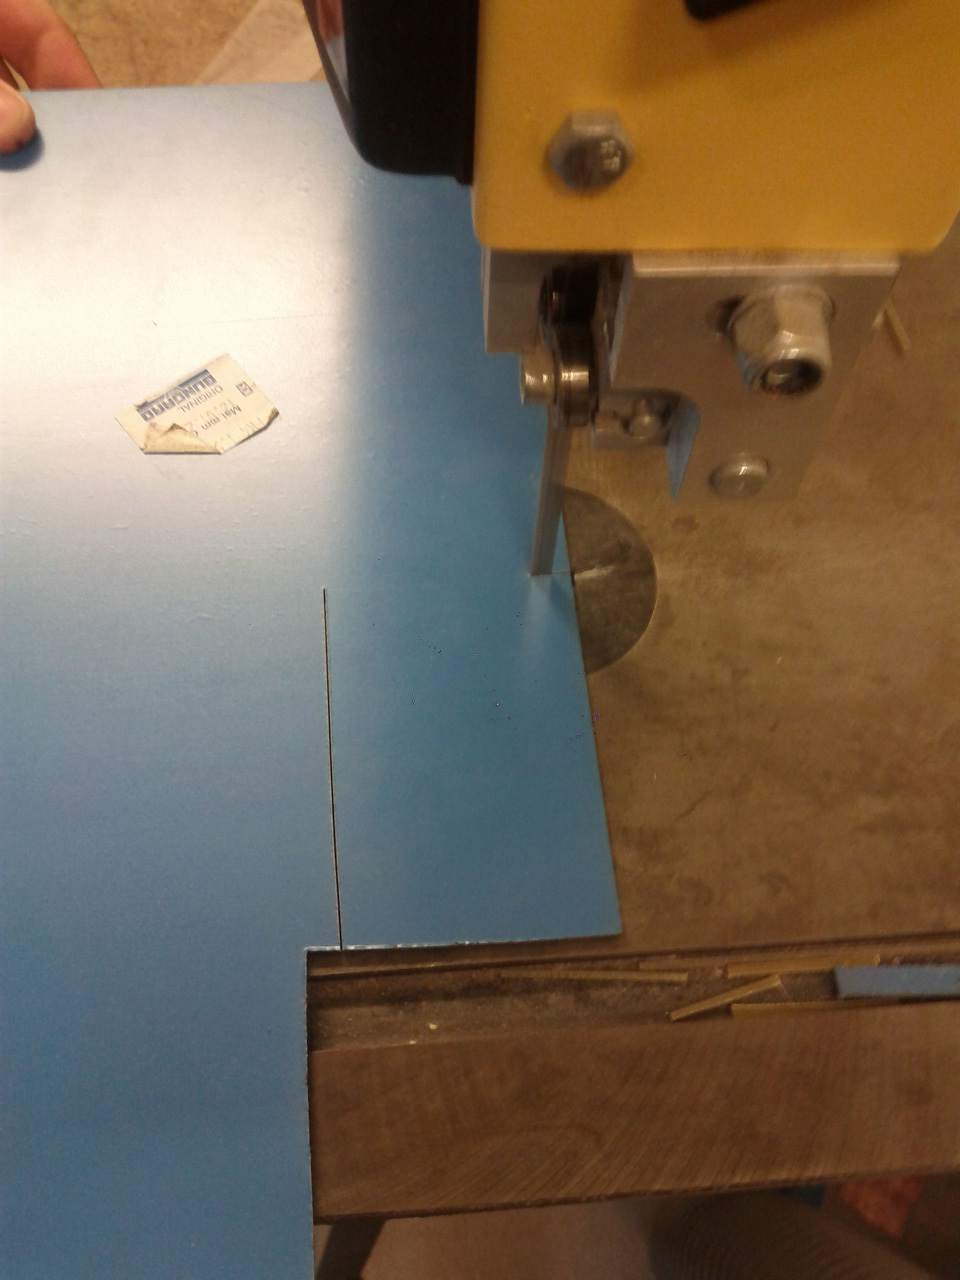 Cutting out the PCB with a band saw